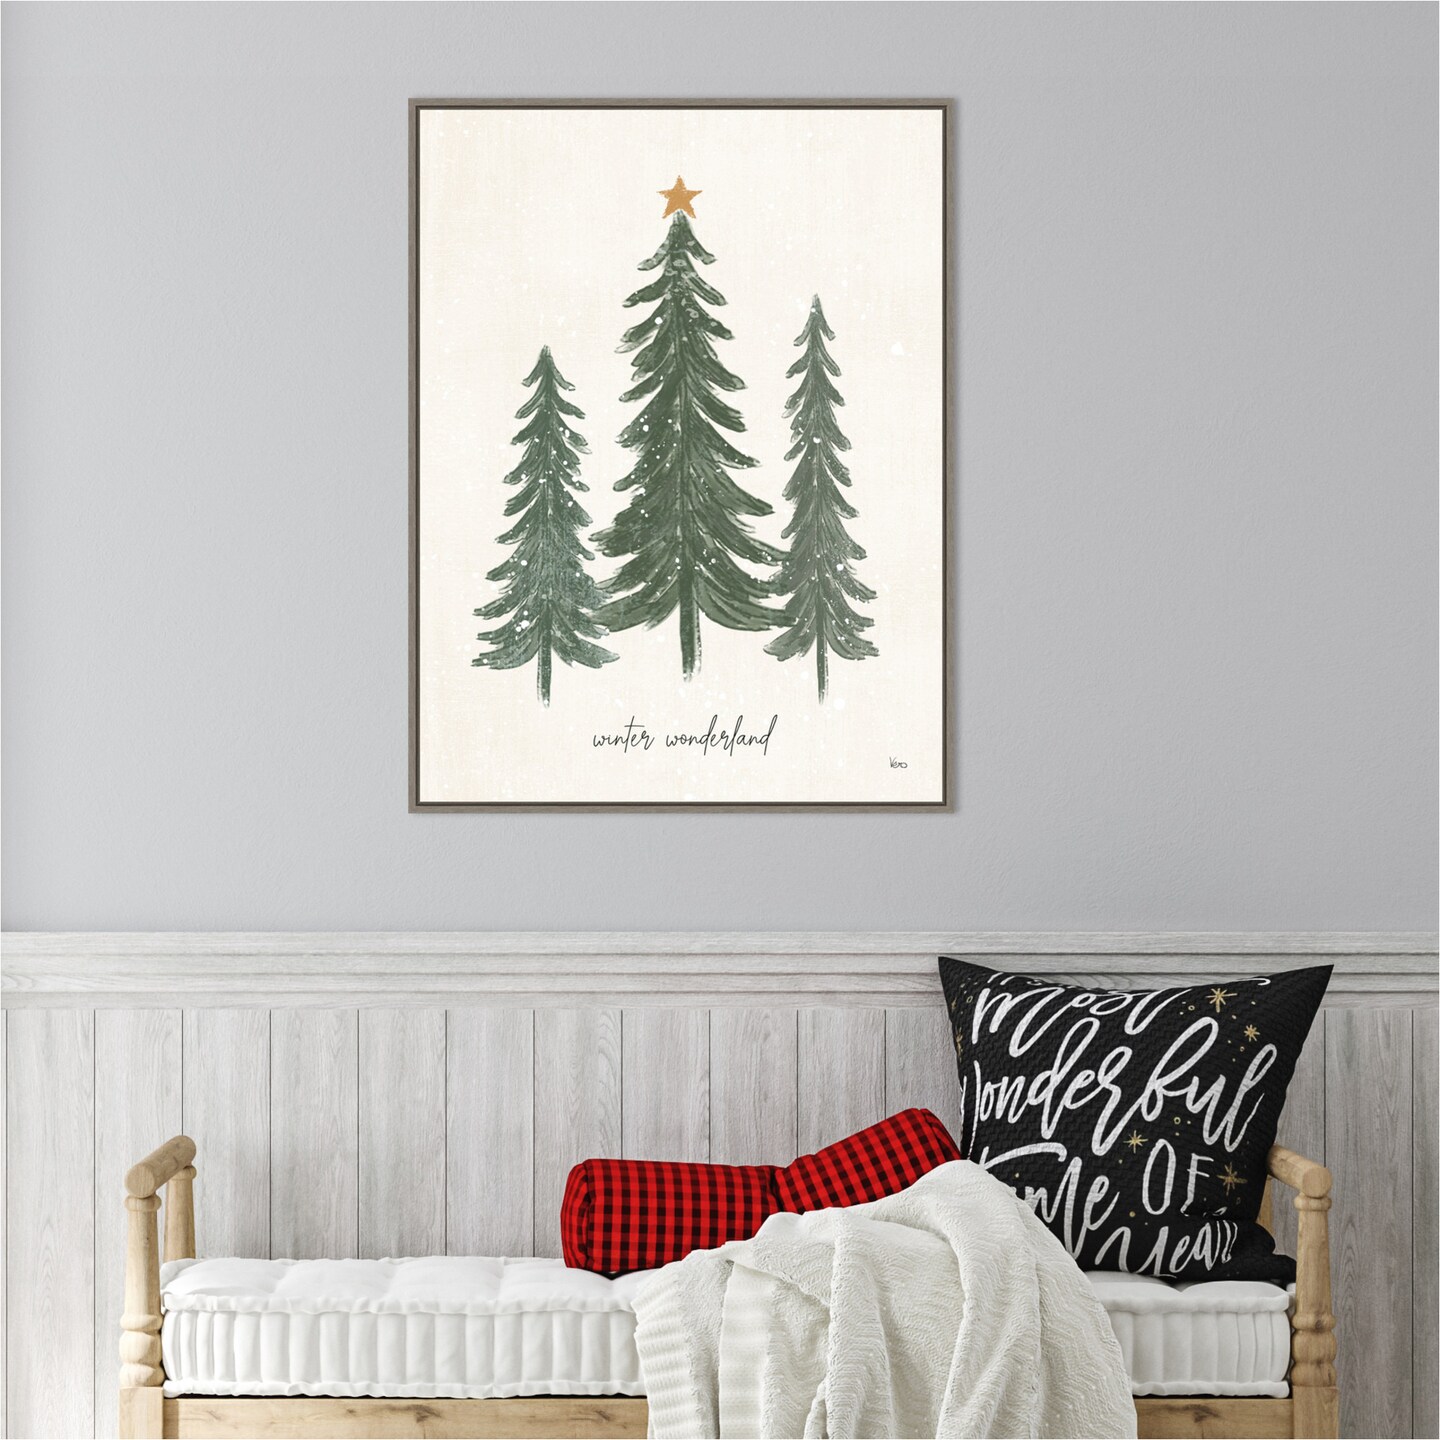 Woodland Christmas Trees by Veronique Charron 23-in. W x 30-in. H. Canvas Wall Art Print Framed in Grey